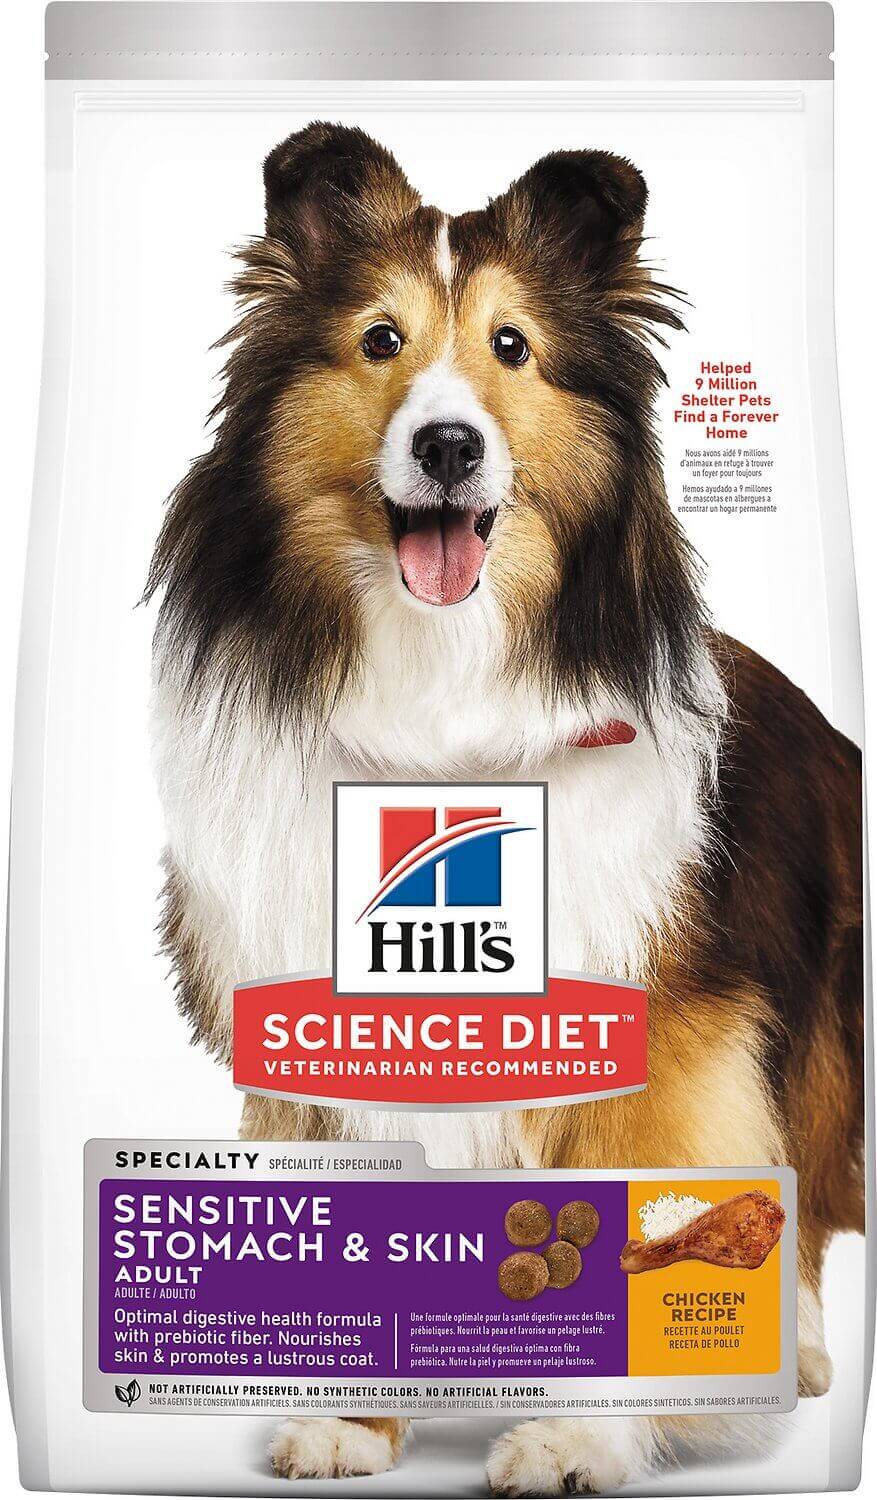 Hill's Science Diet Sensitive Stomach & Skin - Best Dog Food for Sensitive Stomachs